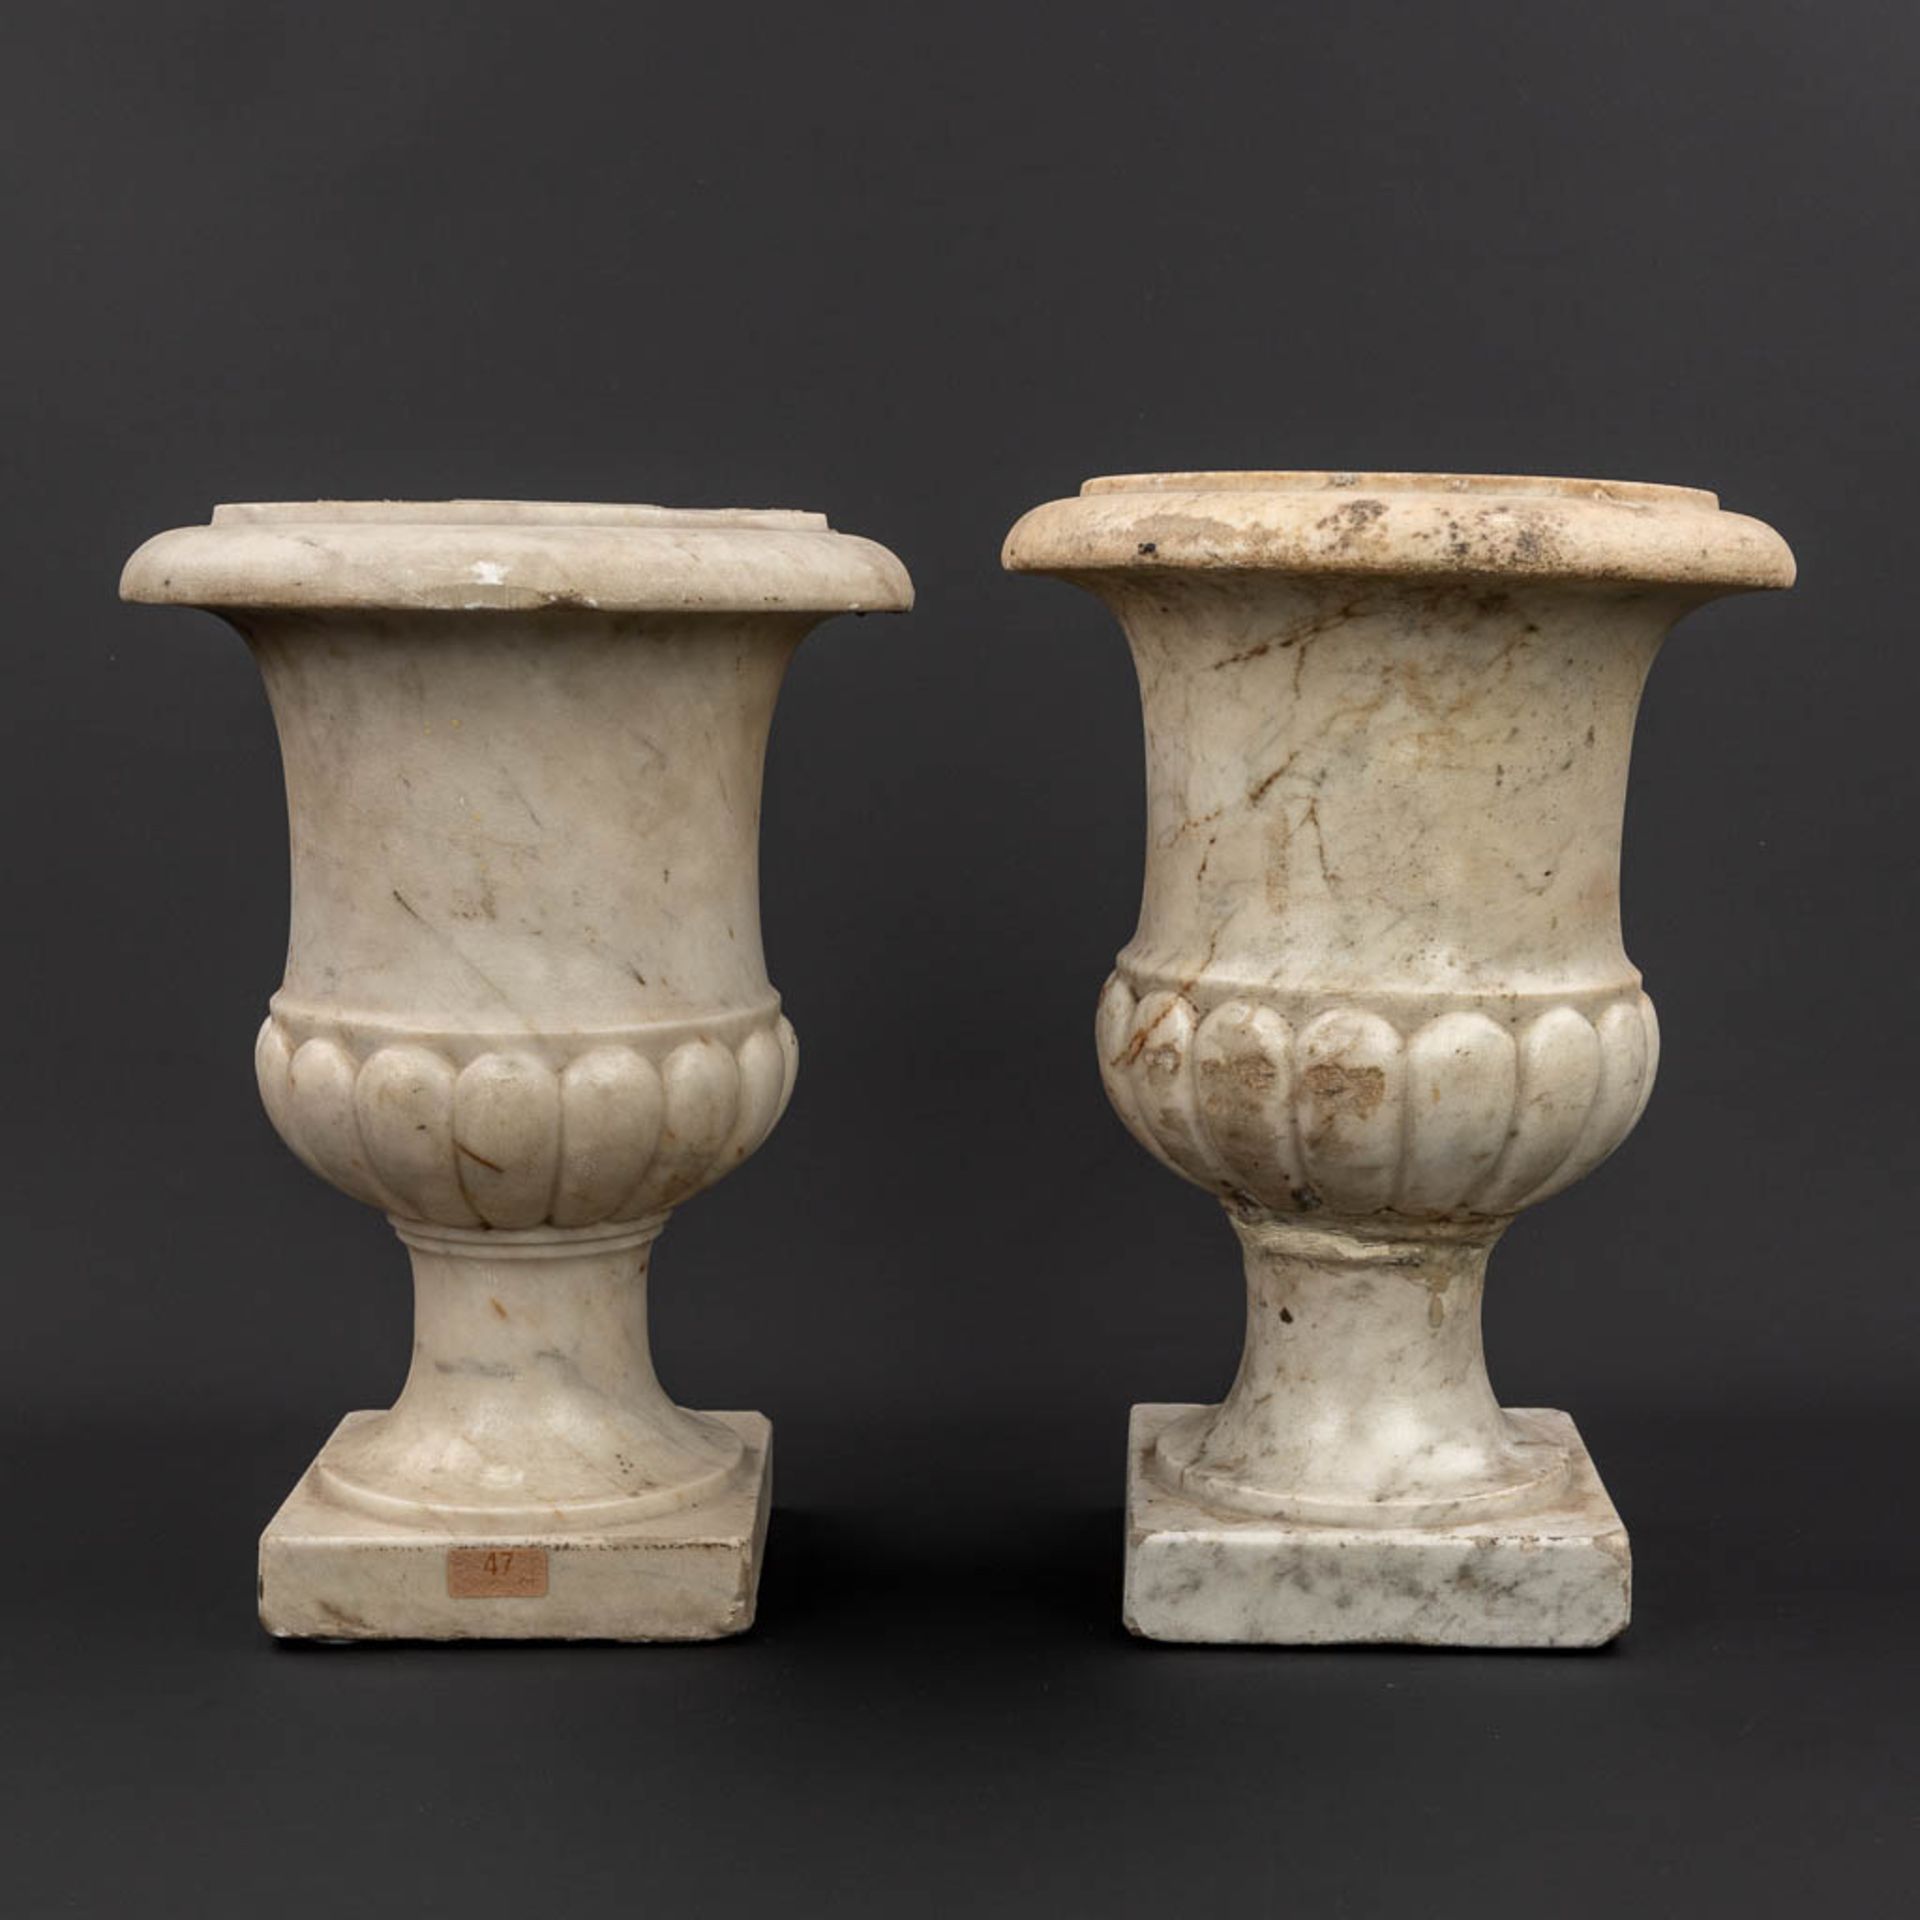 A pair of marble urns 'Medici Vases' made of sculptured marble, 18th C. (H:36 x D:26 cm) - Image 11 of 11